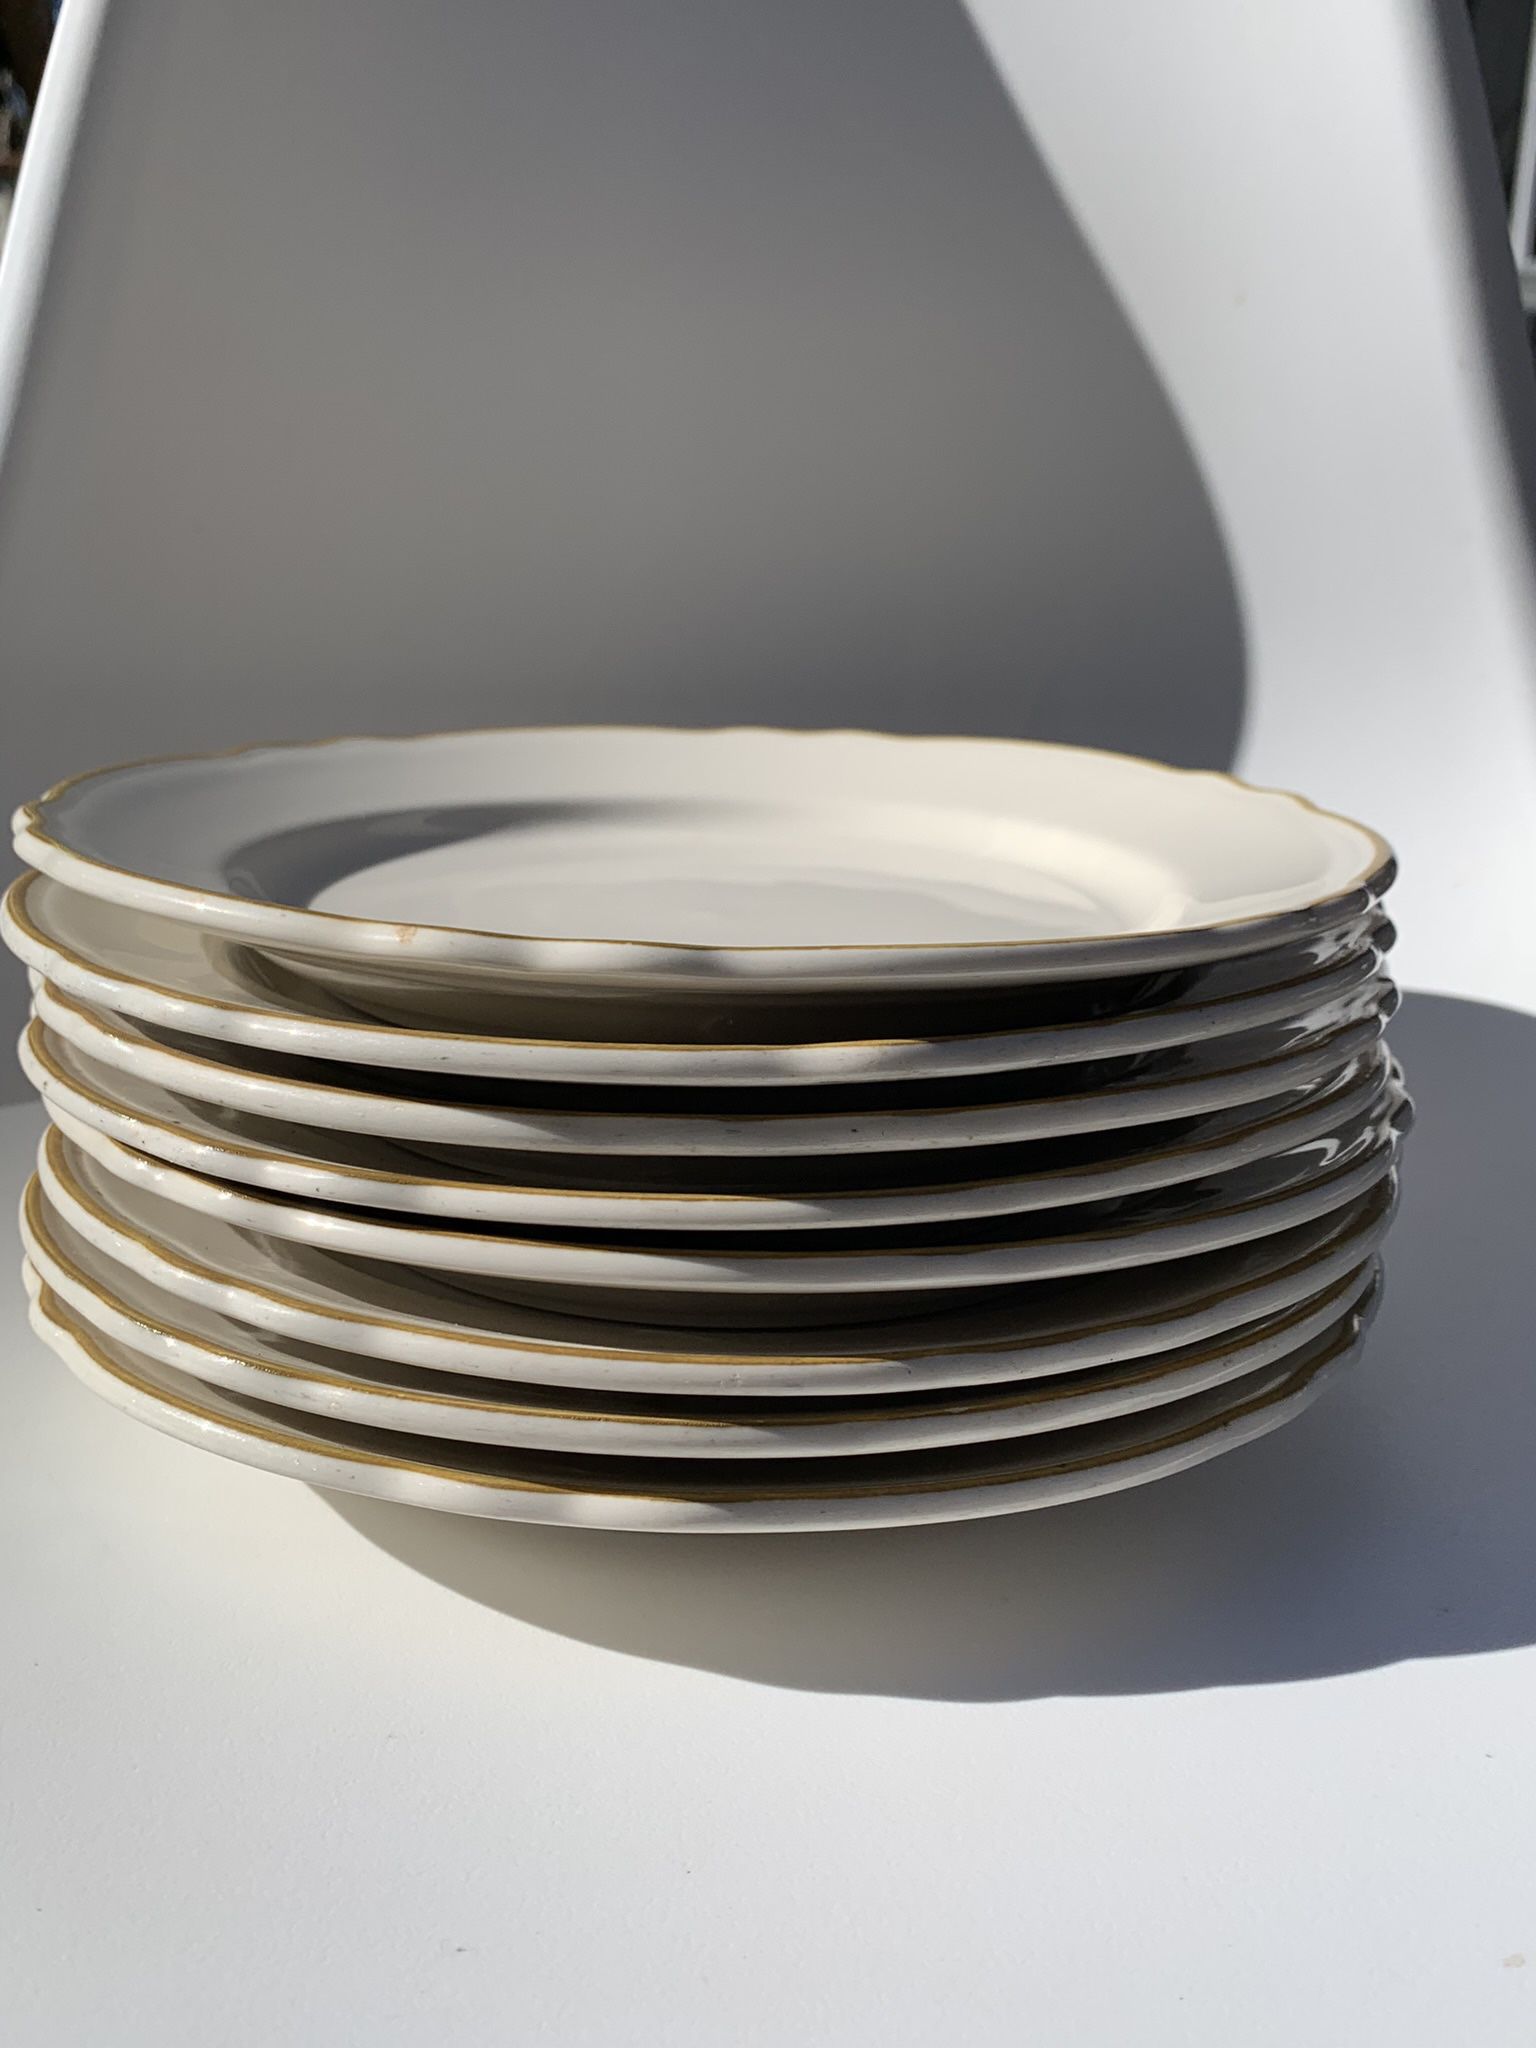 Collectable Plates 